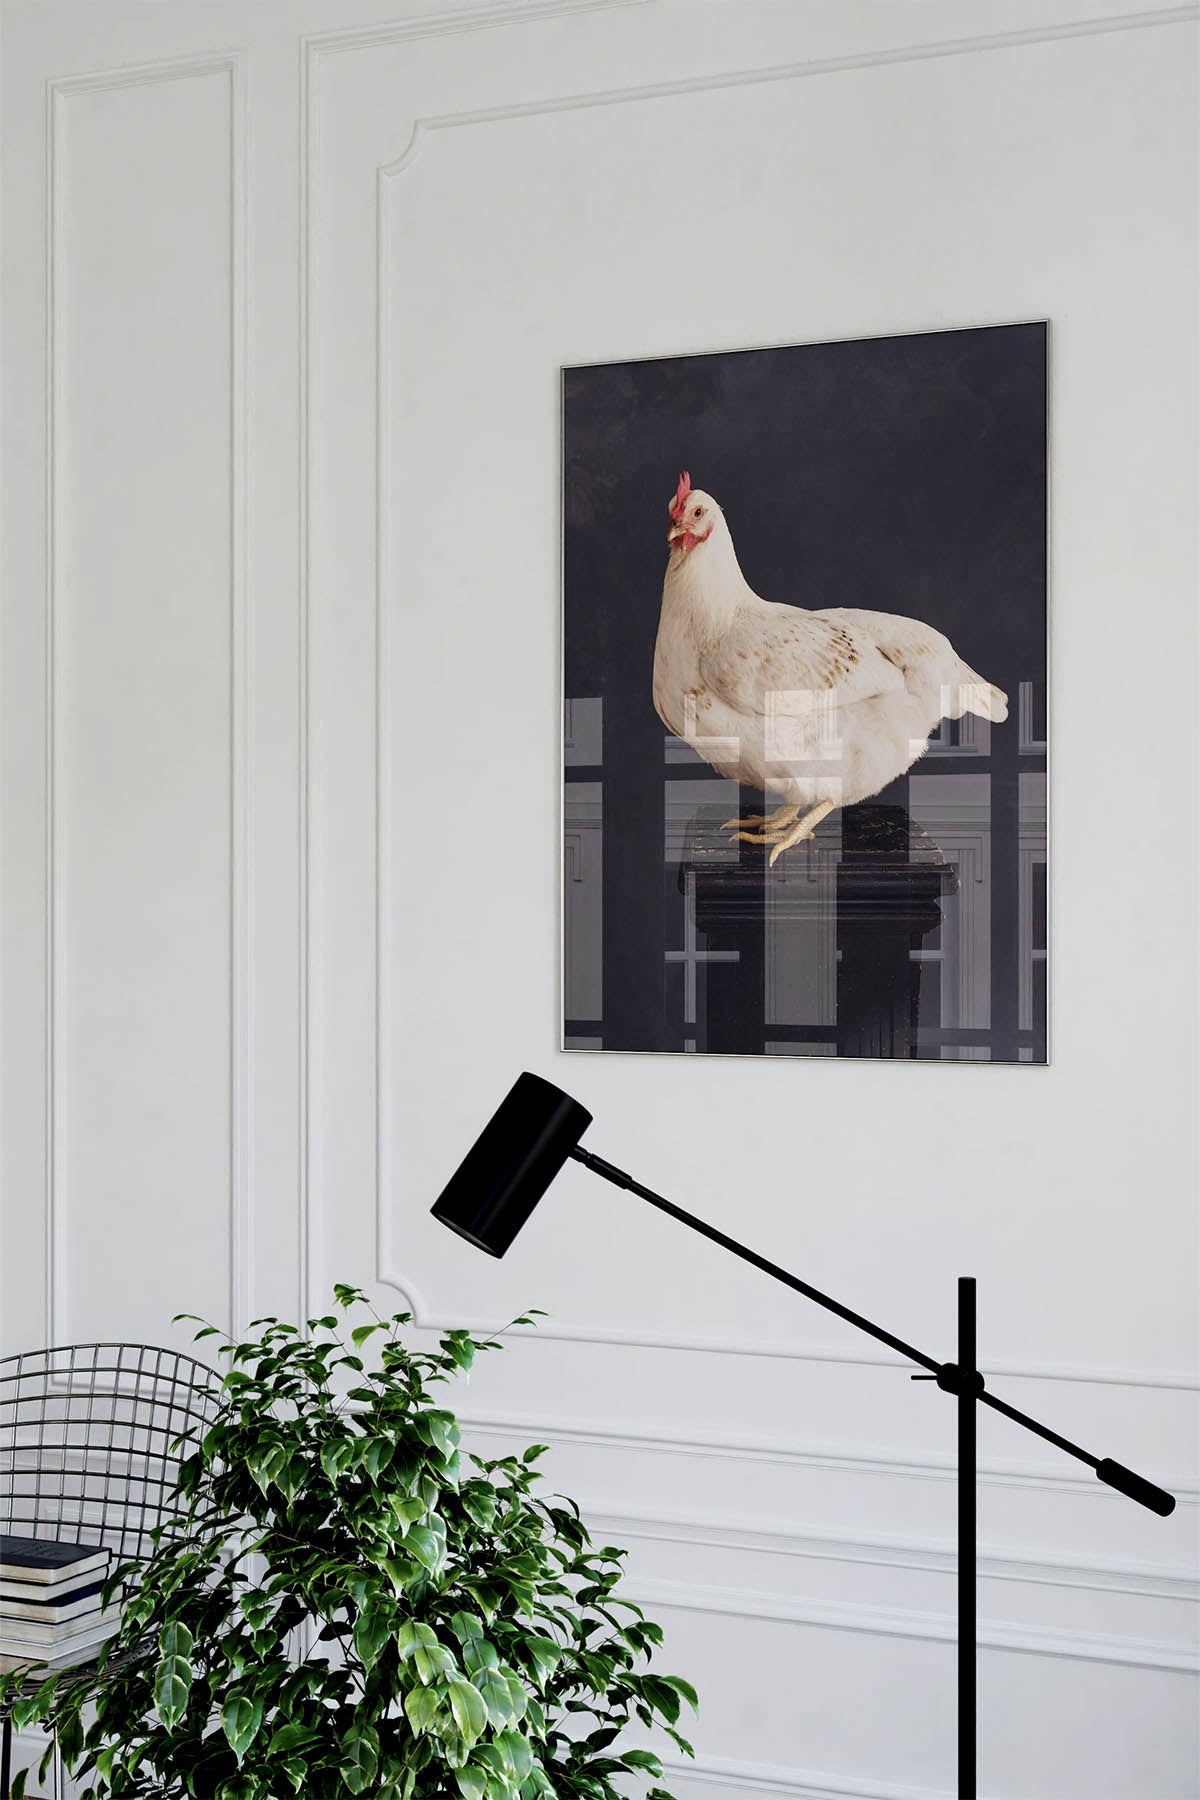 Fine Art Print Of A White Chicken Standing On A Black Plinth With A Black Background Framed On A Wall In An European Style Entry Way or Living Room.